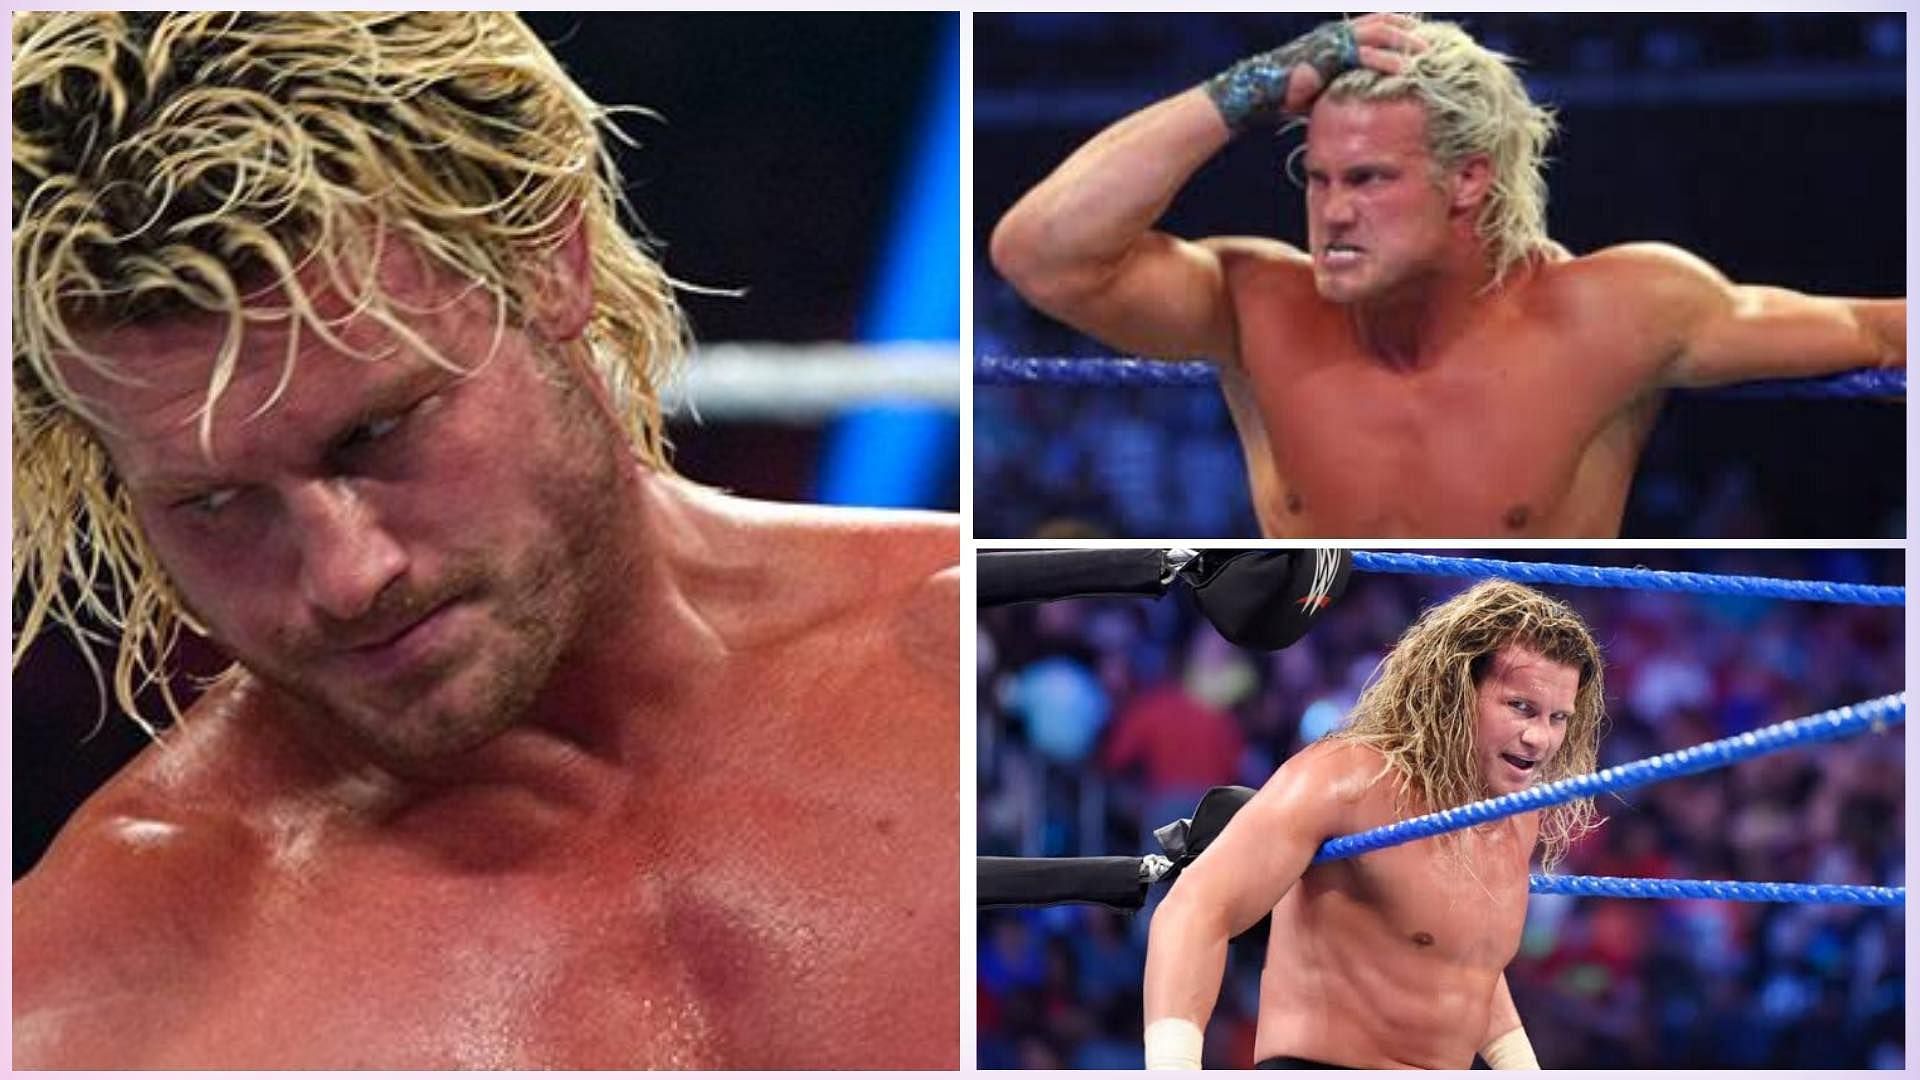 Dolph Ziggler is a former WWE United States Champion.